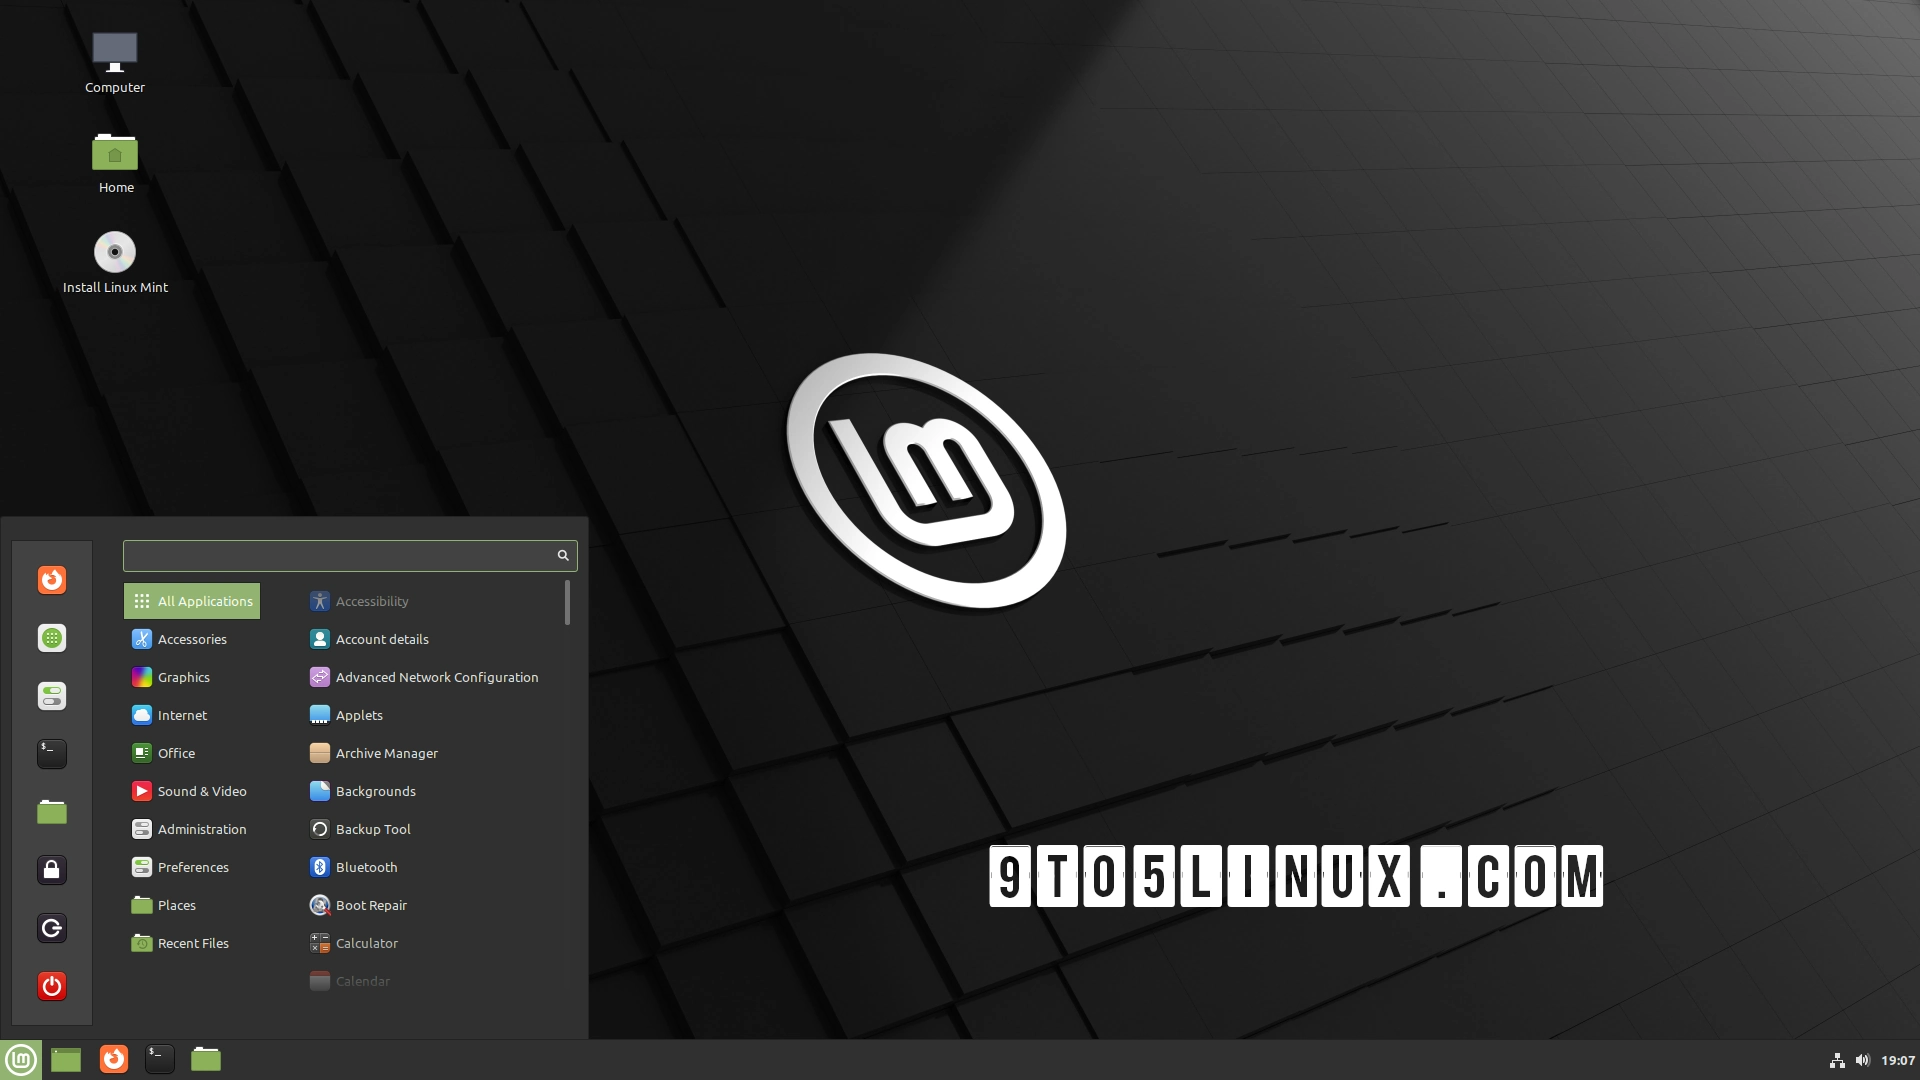 Linux Mint 21.1 “Vera” to Arrive on Christmas with Improved Driver Manager, New ISO Verifier